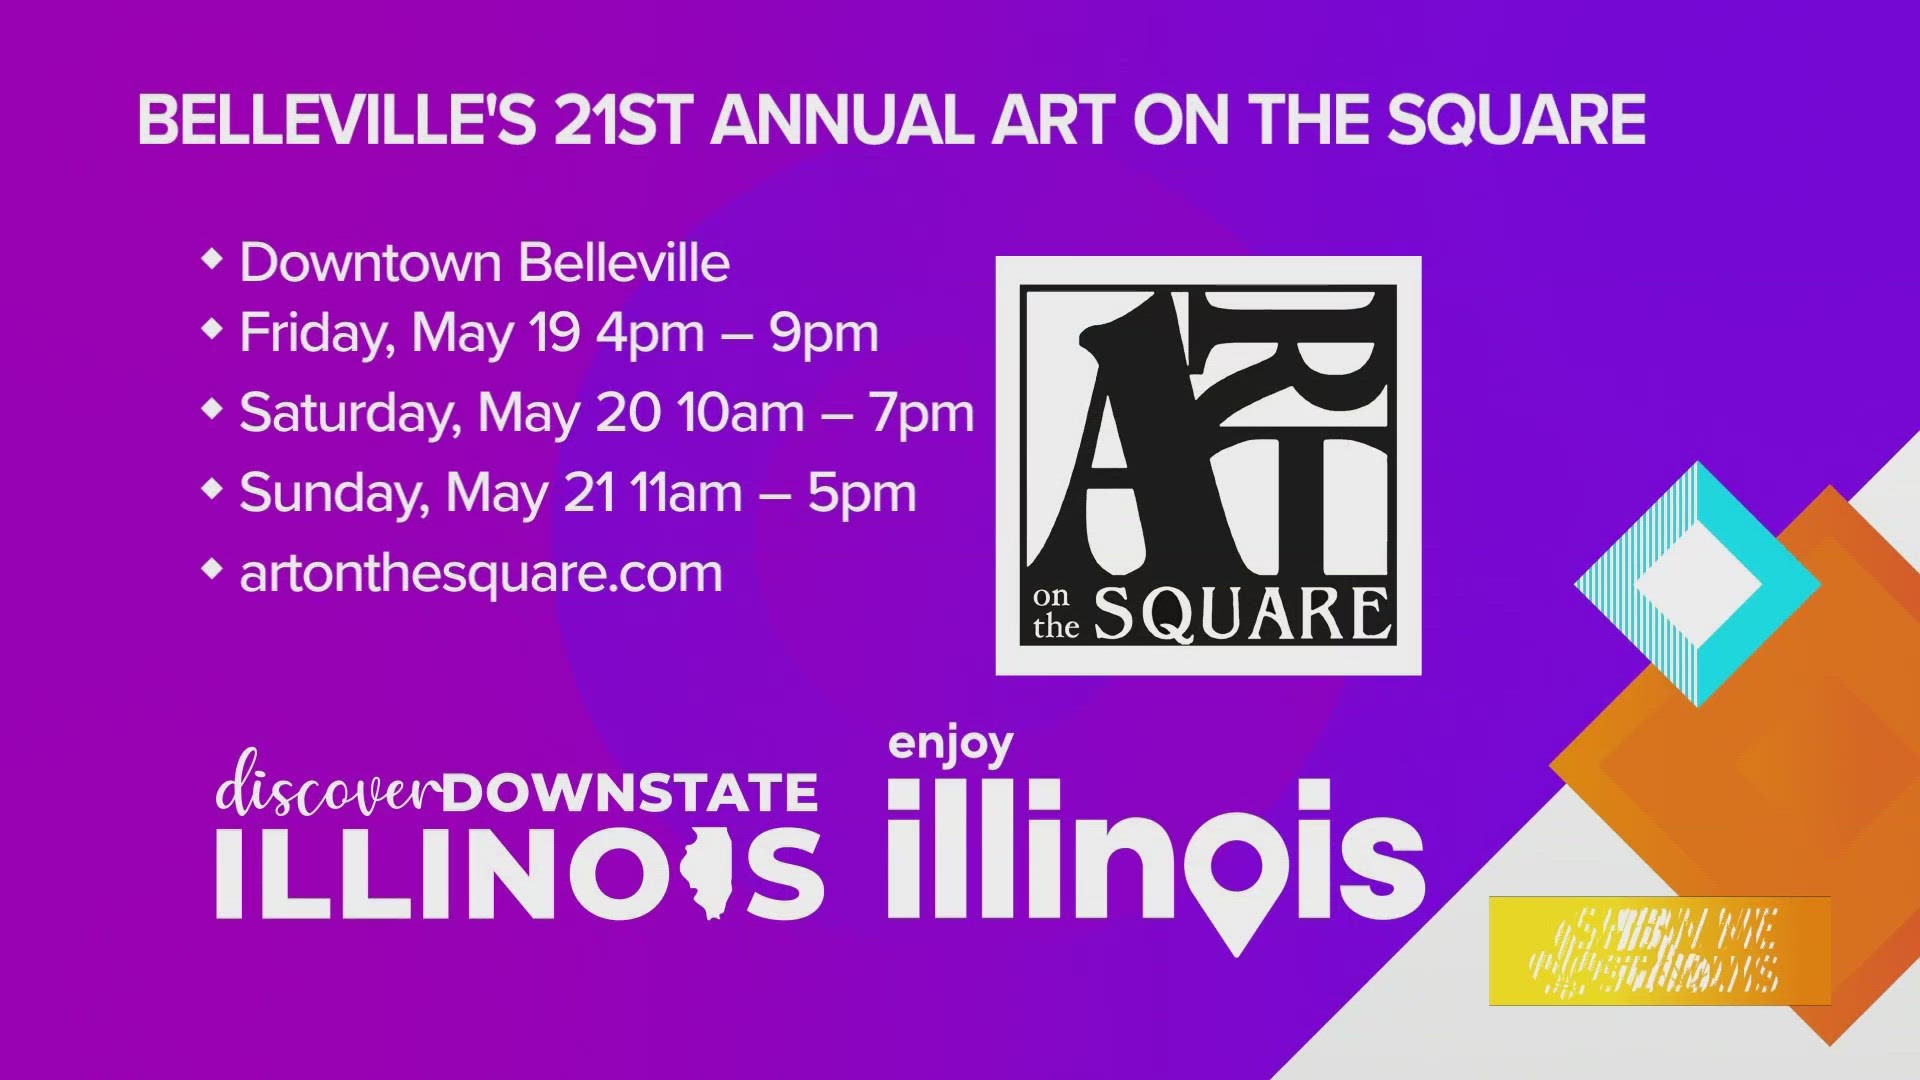 Art on the Square is a juried fine art show located at the Veterans Memorial Fountain in beautiful downtown Belleville, Illinois.